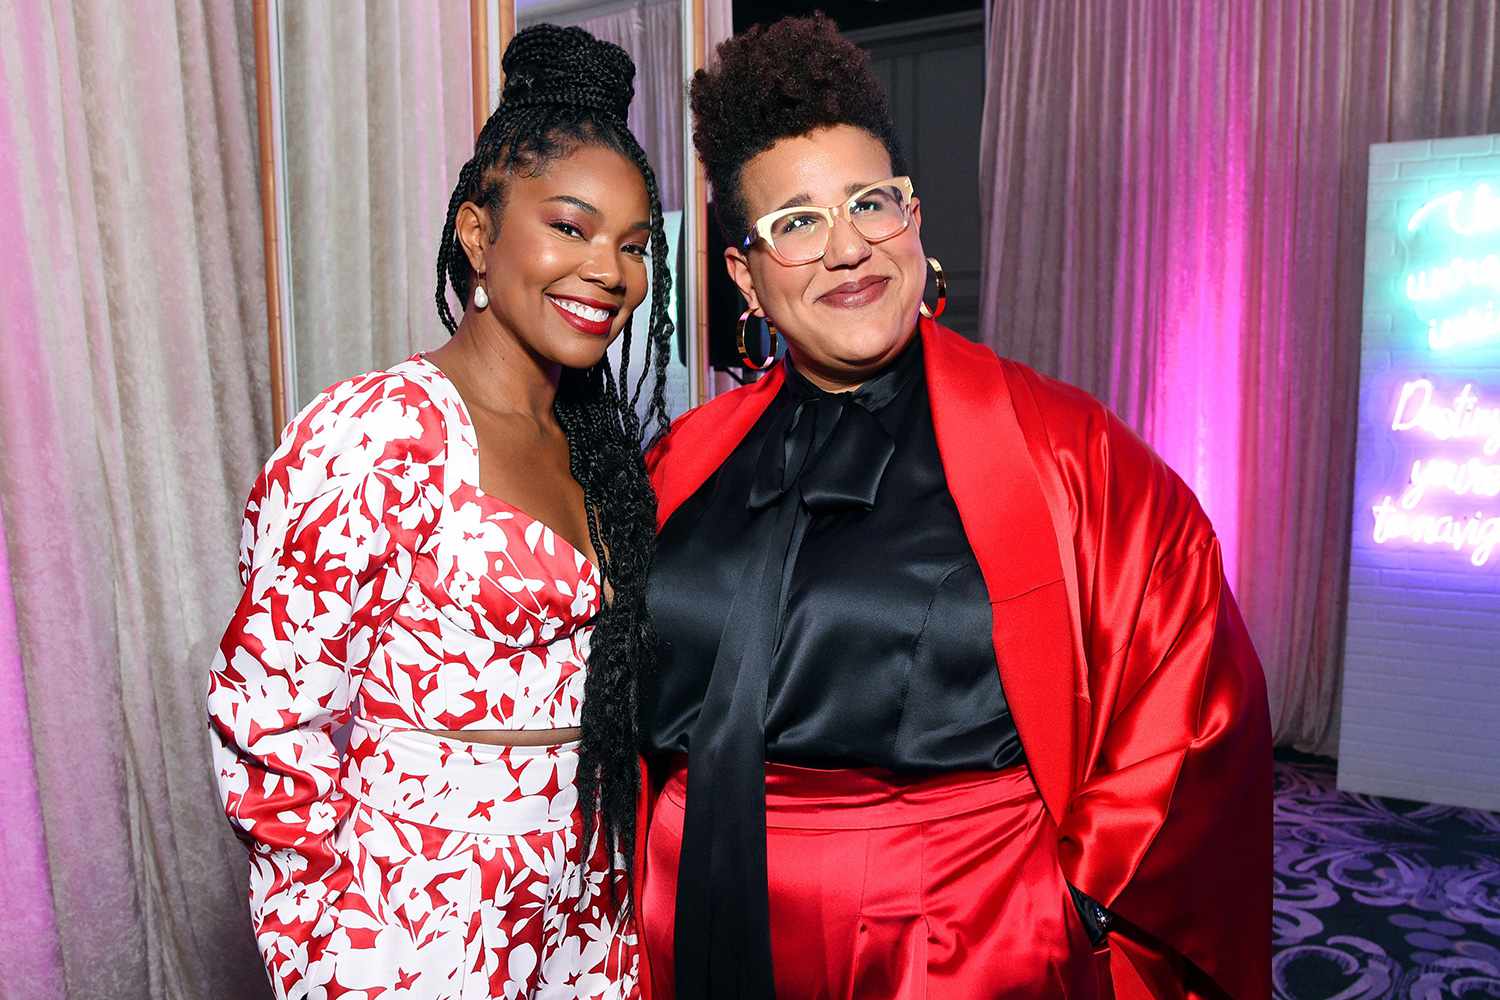 Gabrielle Union and Brittany Howard 13th Annual Essence Black Women in Hollywood Awards Luncheon, Cocktails, Beverly Wilshire, Los Angeles, USA - 06 Feb 2020